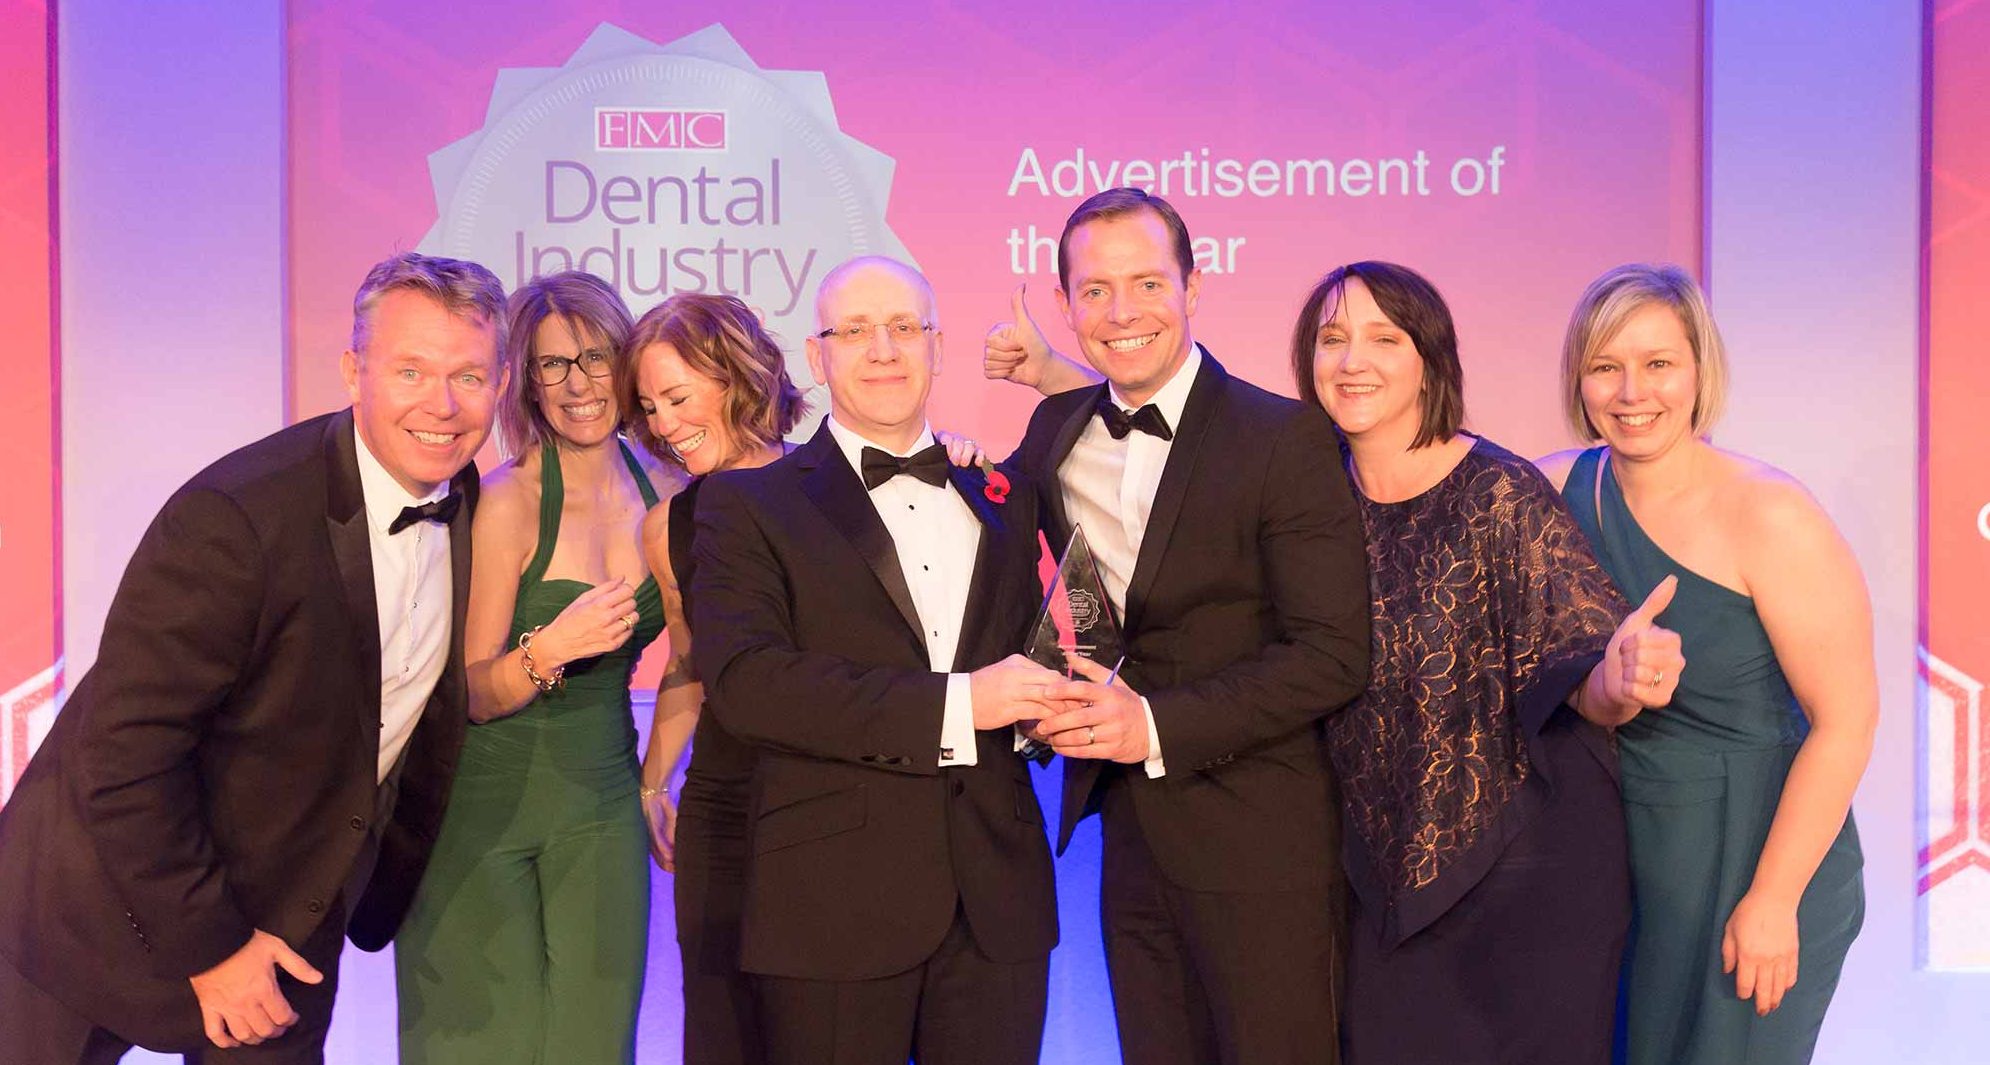 Dental Industry Awards 2019 Advertisement of the Year